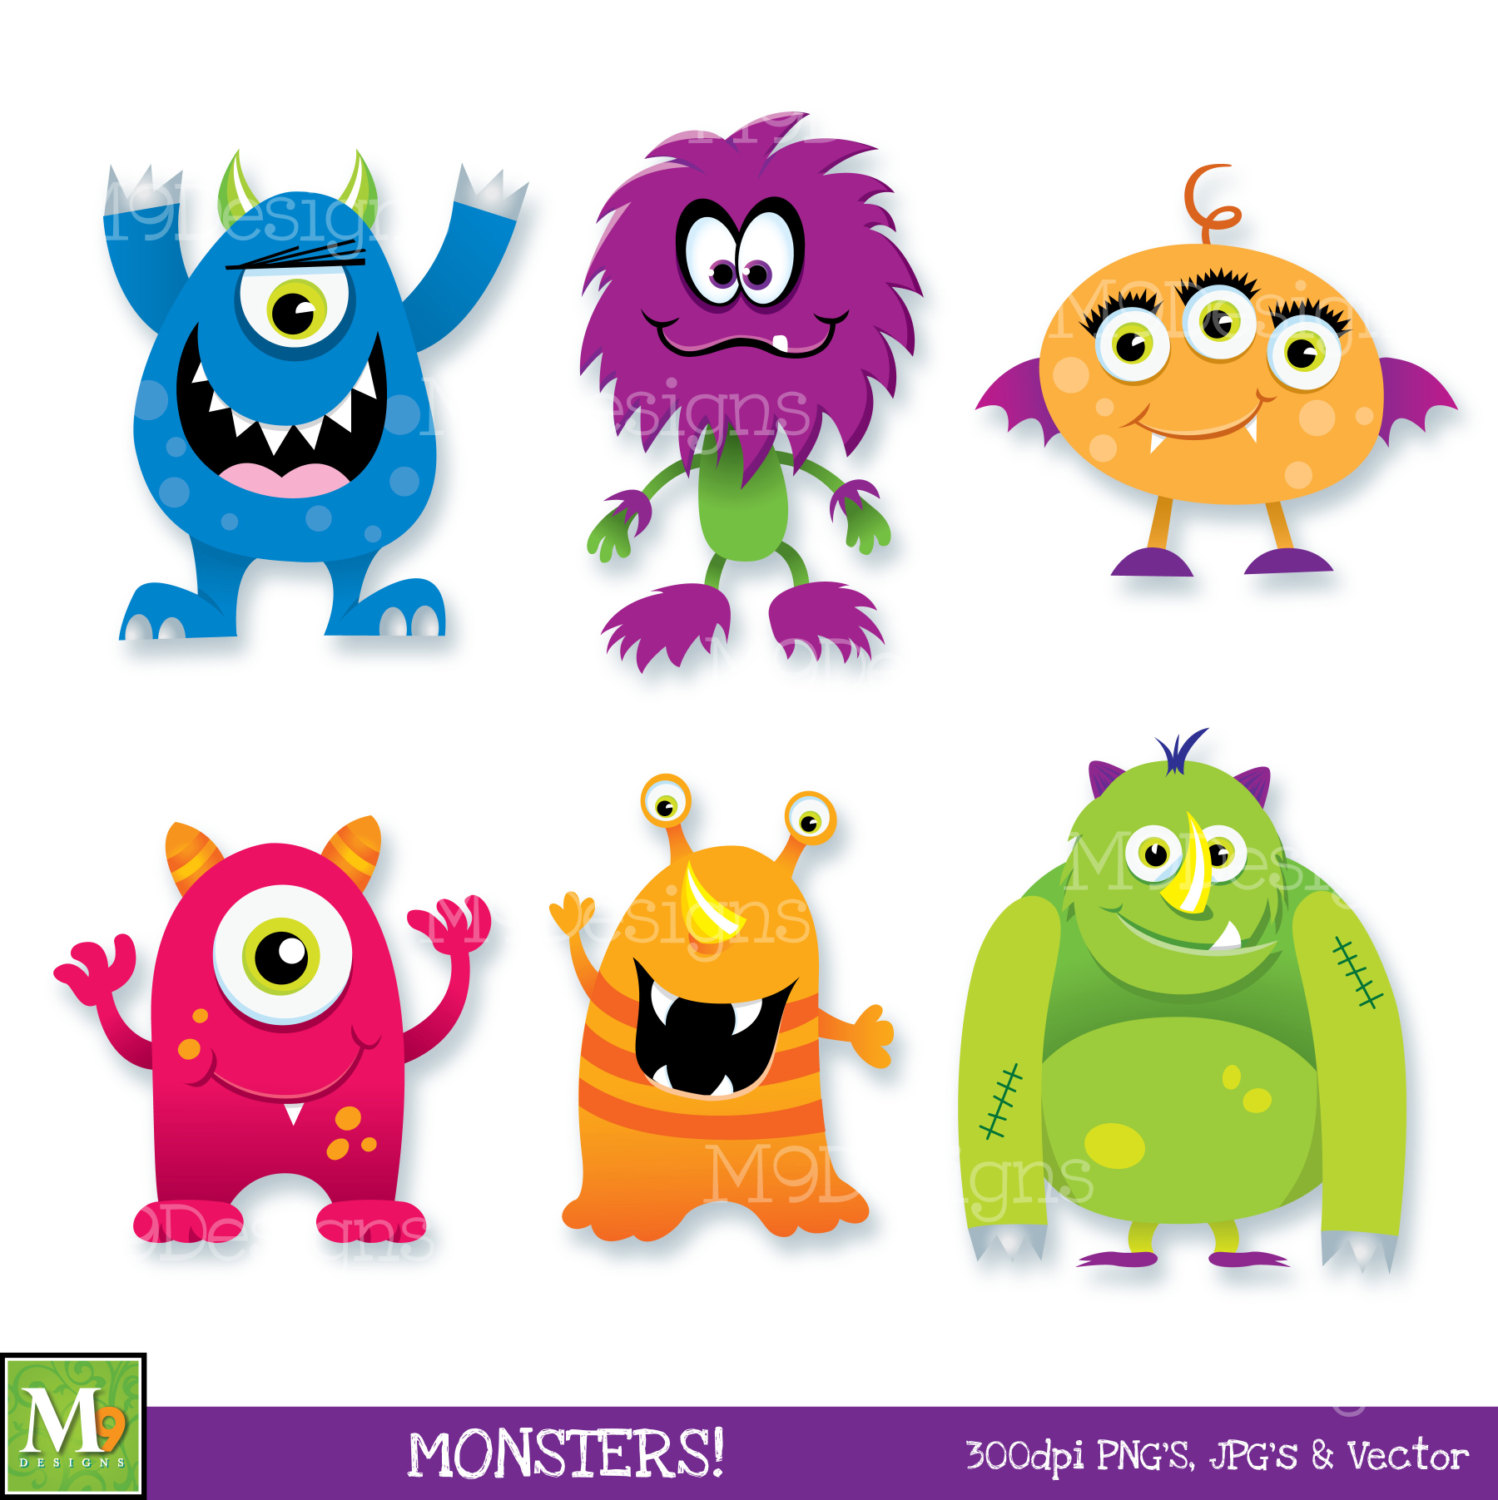 MONSTERS Clip Art: Monster Clipart Scary Fun Cute by MNINEDESIGNS 